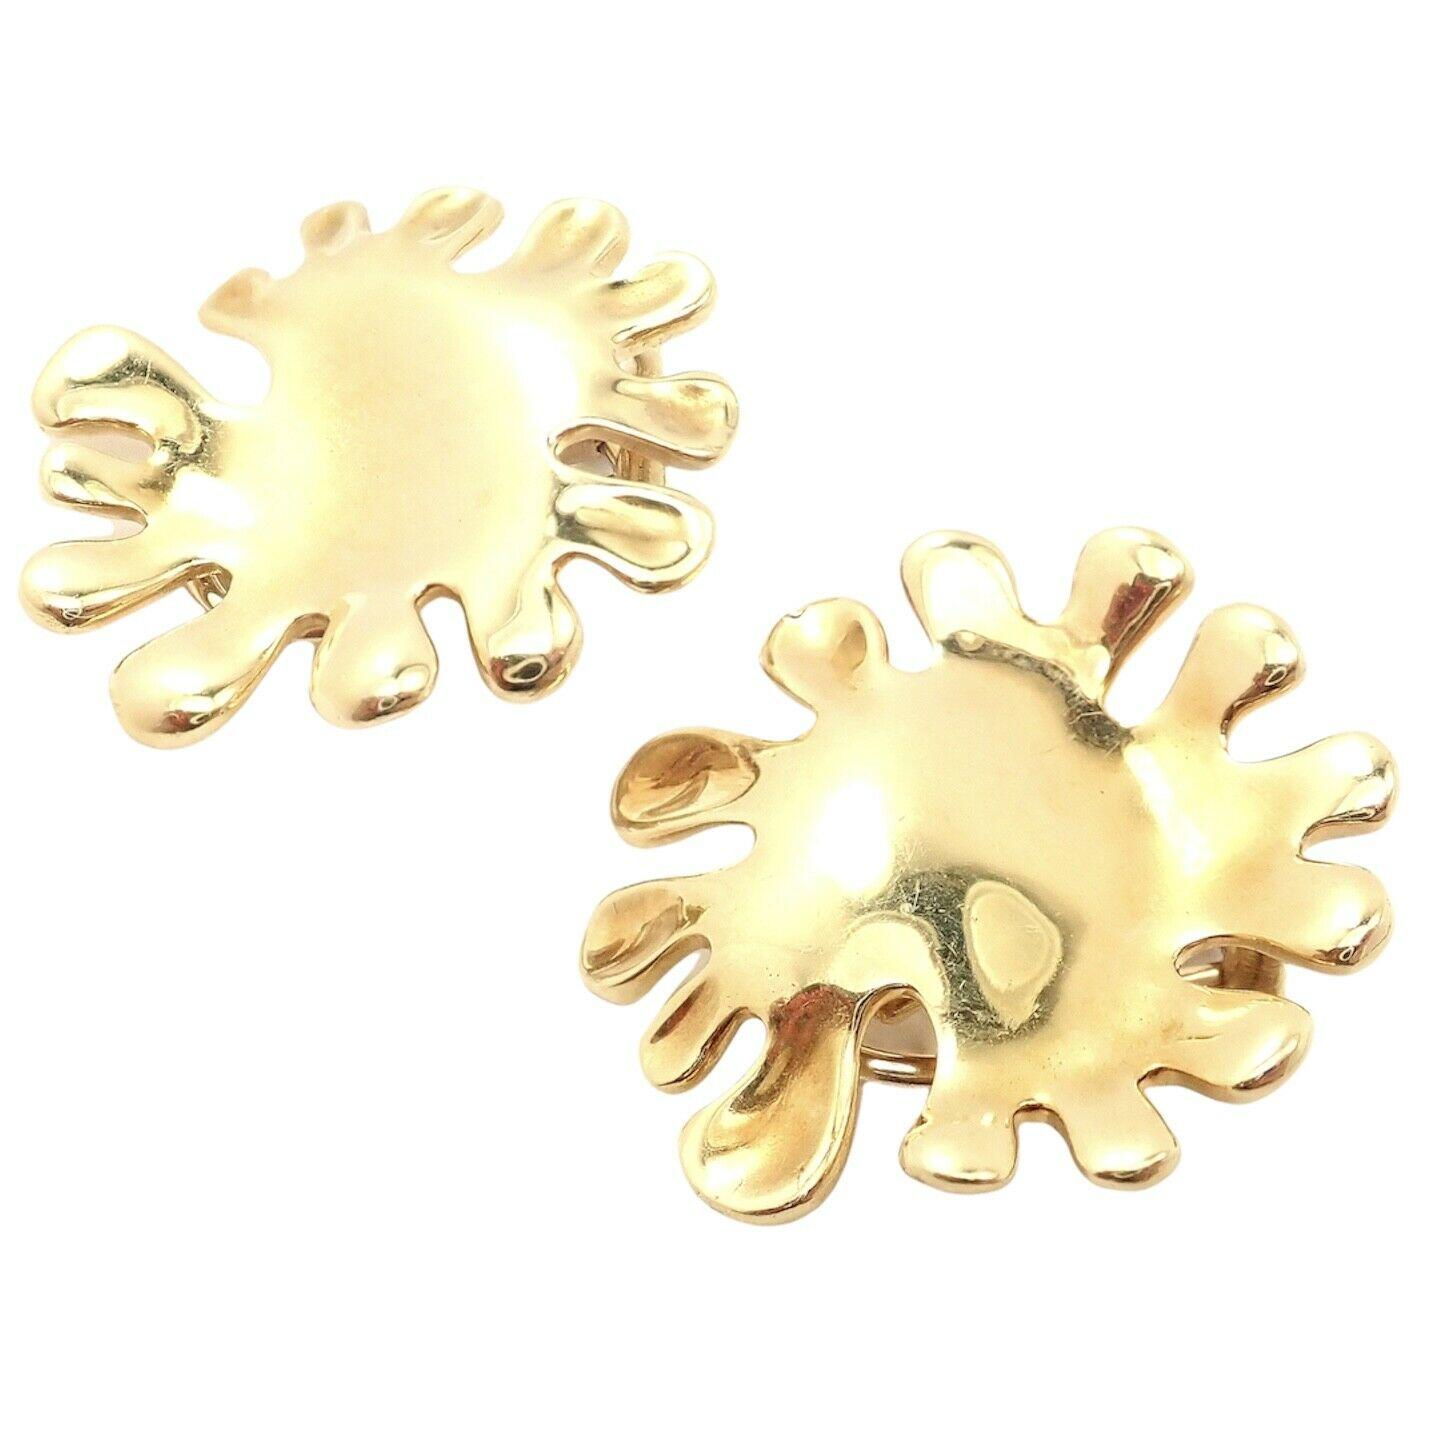 18k Yellow Gold Nickelodeon Abstract Earrings by Angela Cummings for Tiffany & Co. 
These earrings are for non pierced ears, but they can be converted by adding posts.
Details: 
Measurements: 26mm x 25mm
Weight: 15 grams
Stamped Hallmarks: